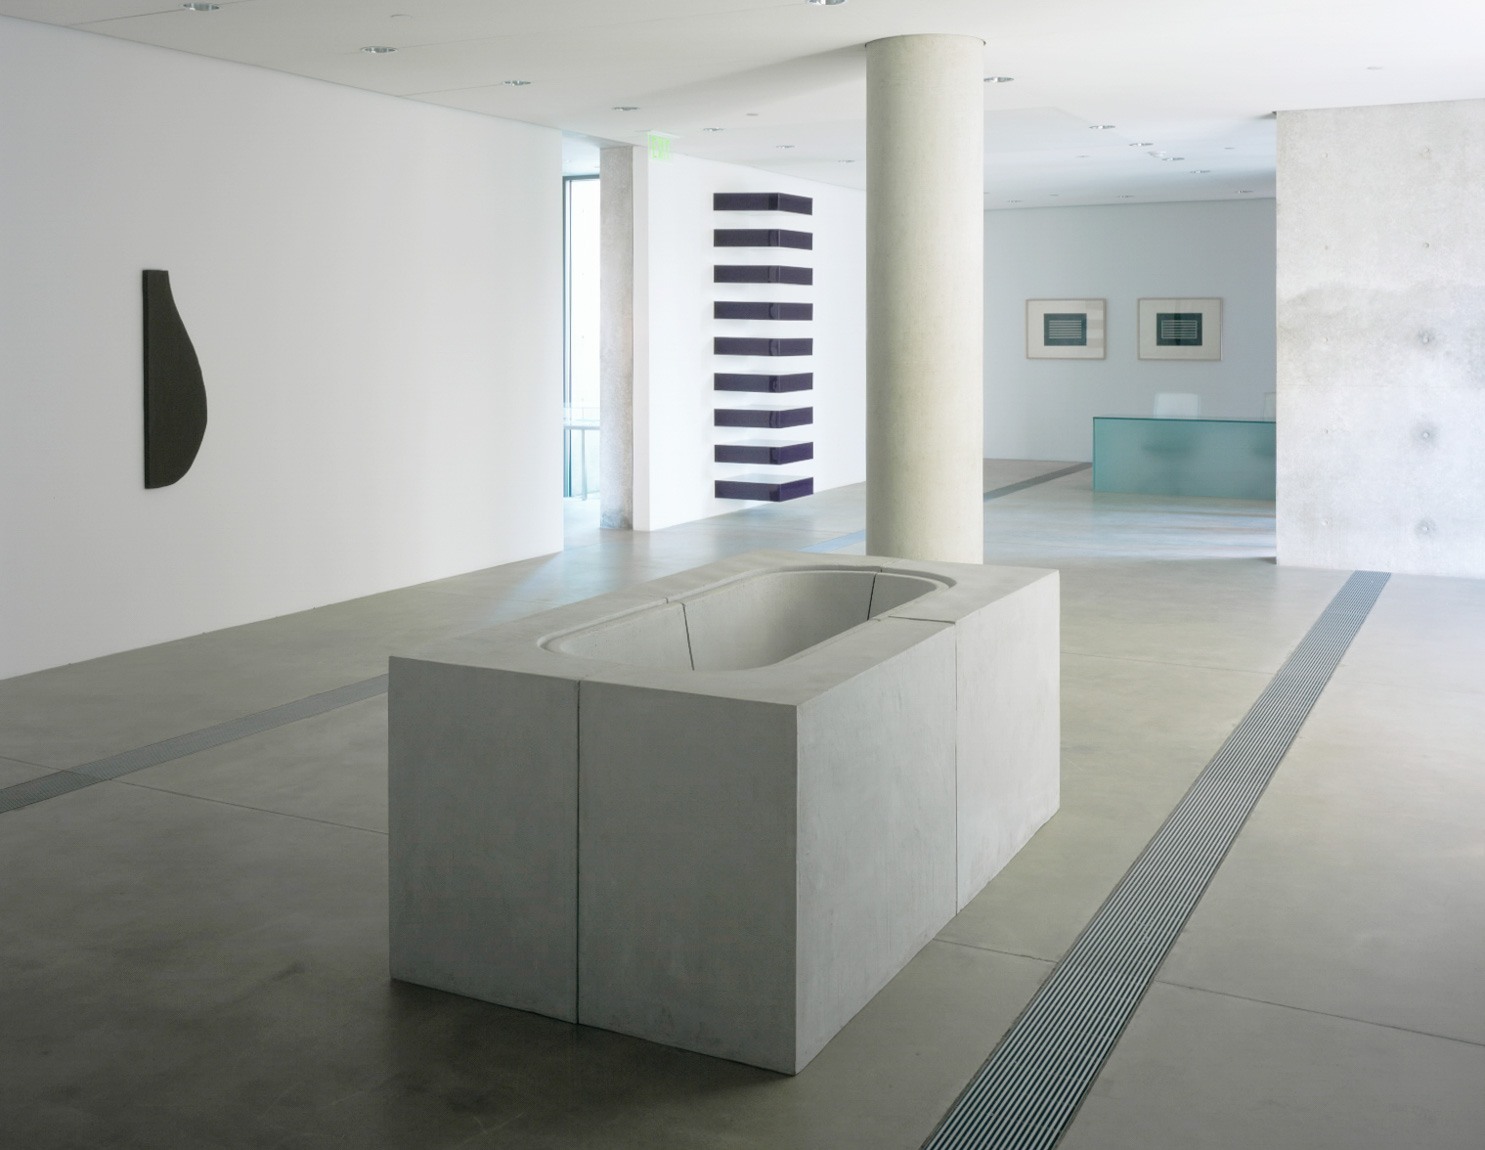 A concrete tub sits on the concrete floor of the Entrance Gallery, with a stack by Donald Judd behind it, and a black Kelly painting on the wall across from it.